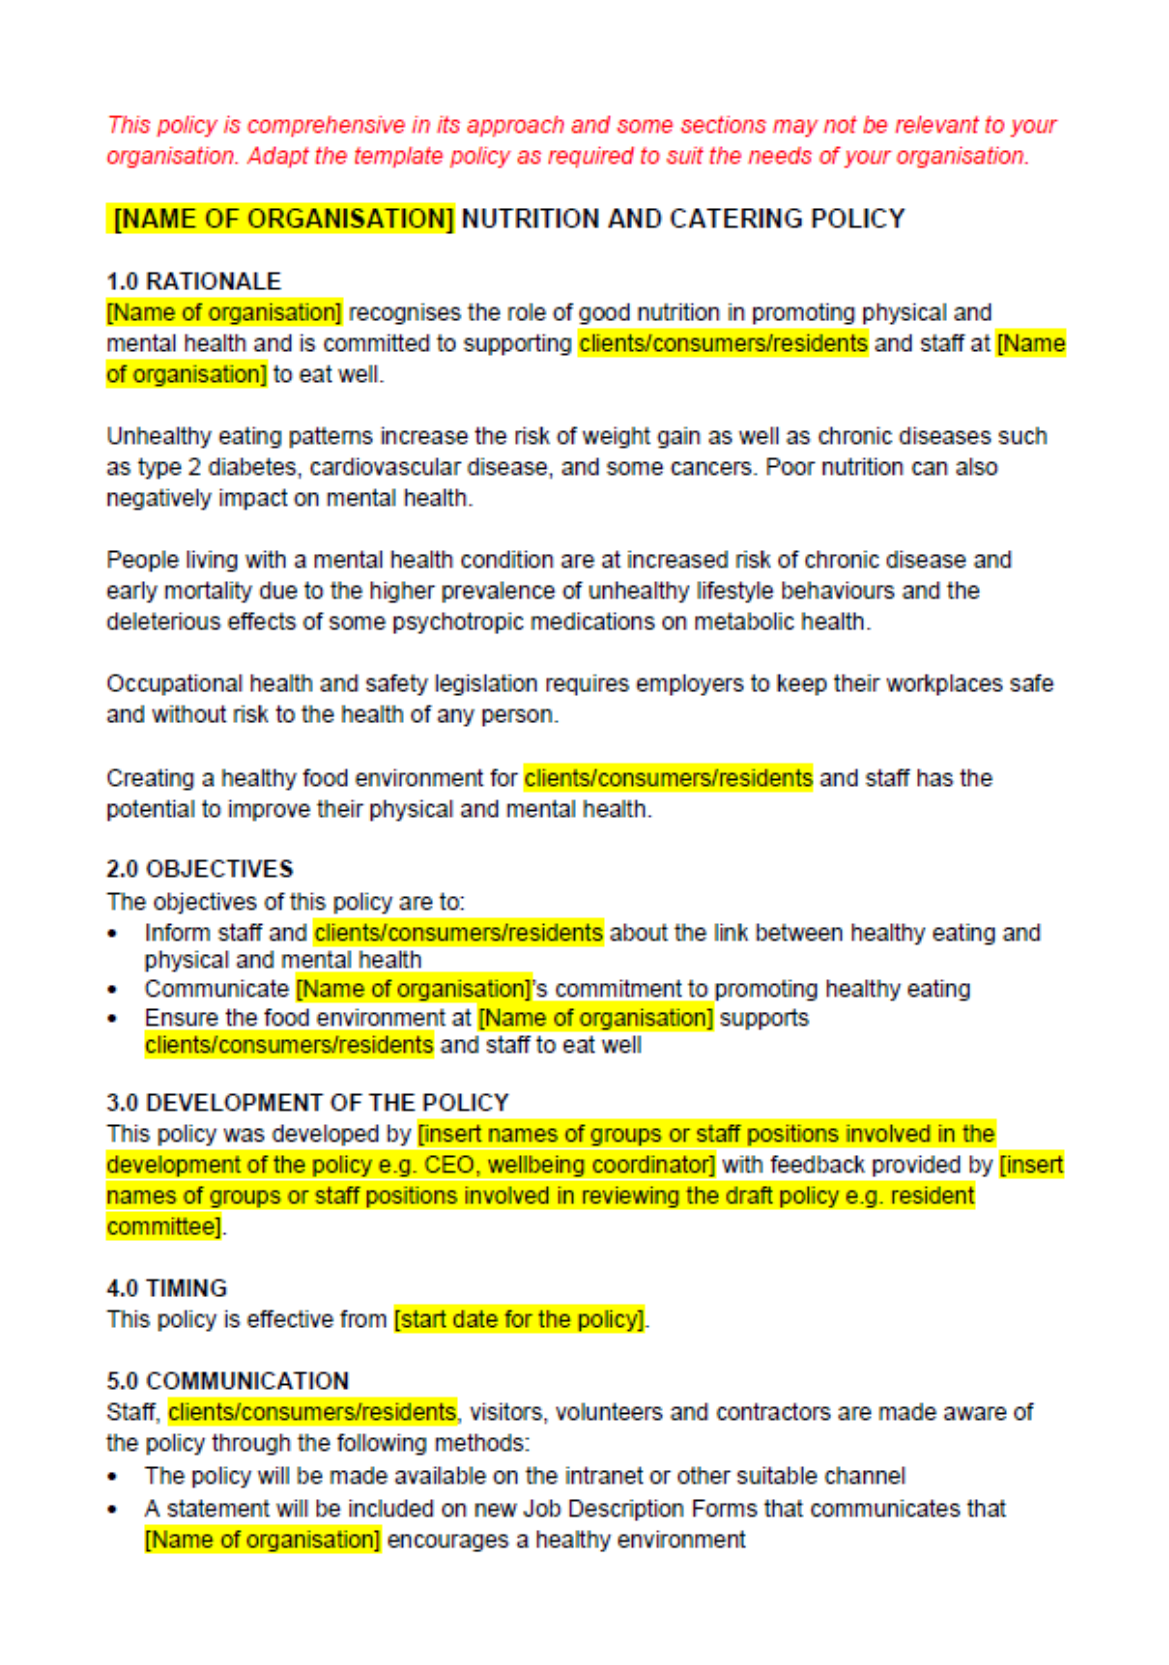 Nutrition and catering policy template word document thumbnail